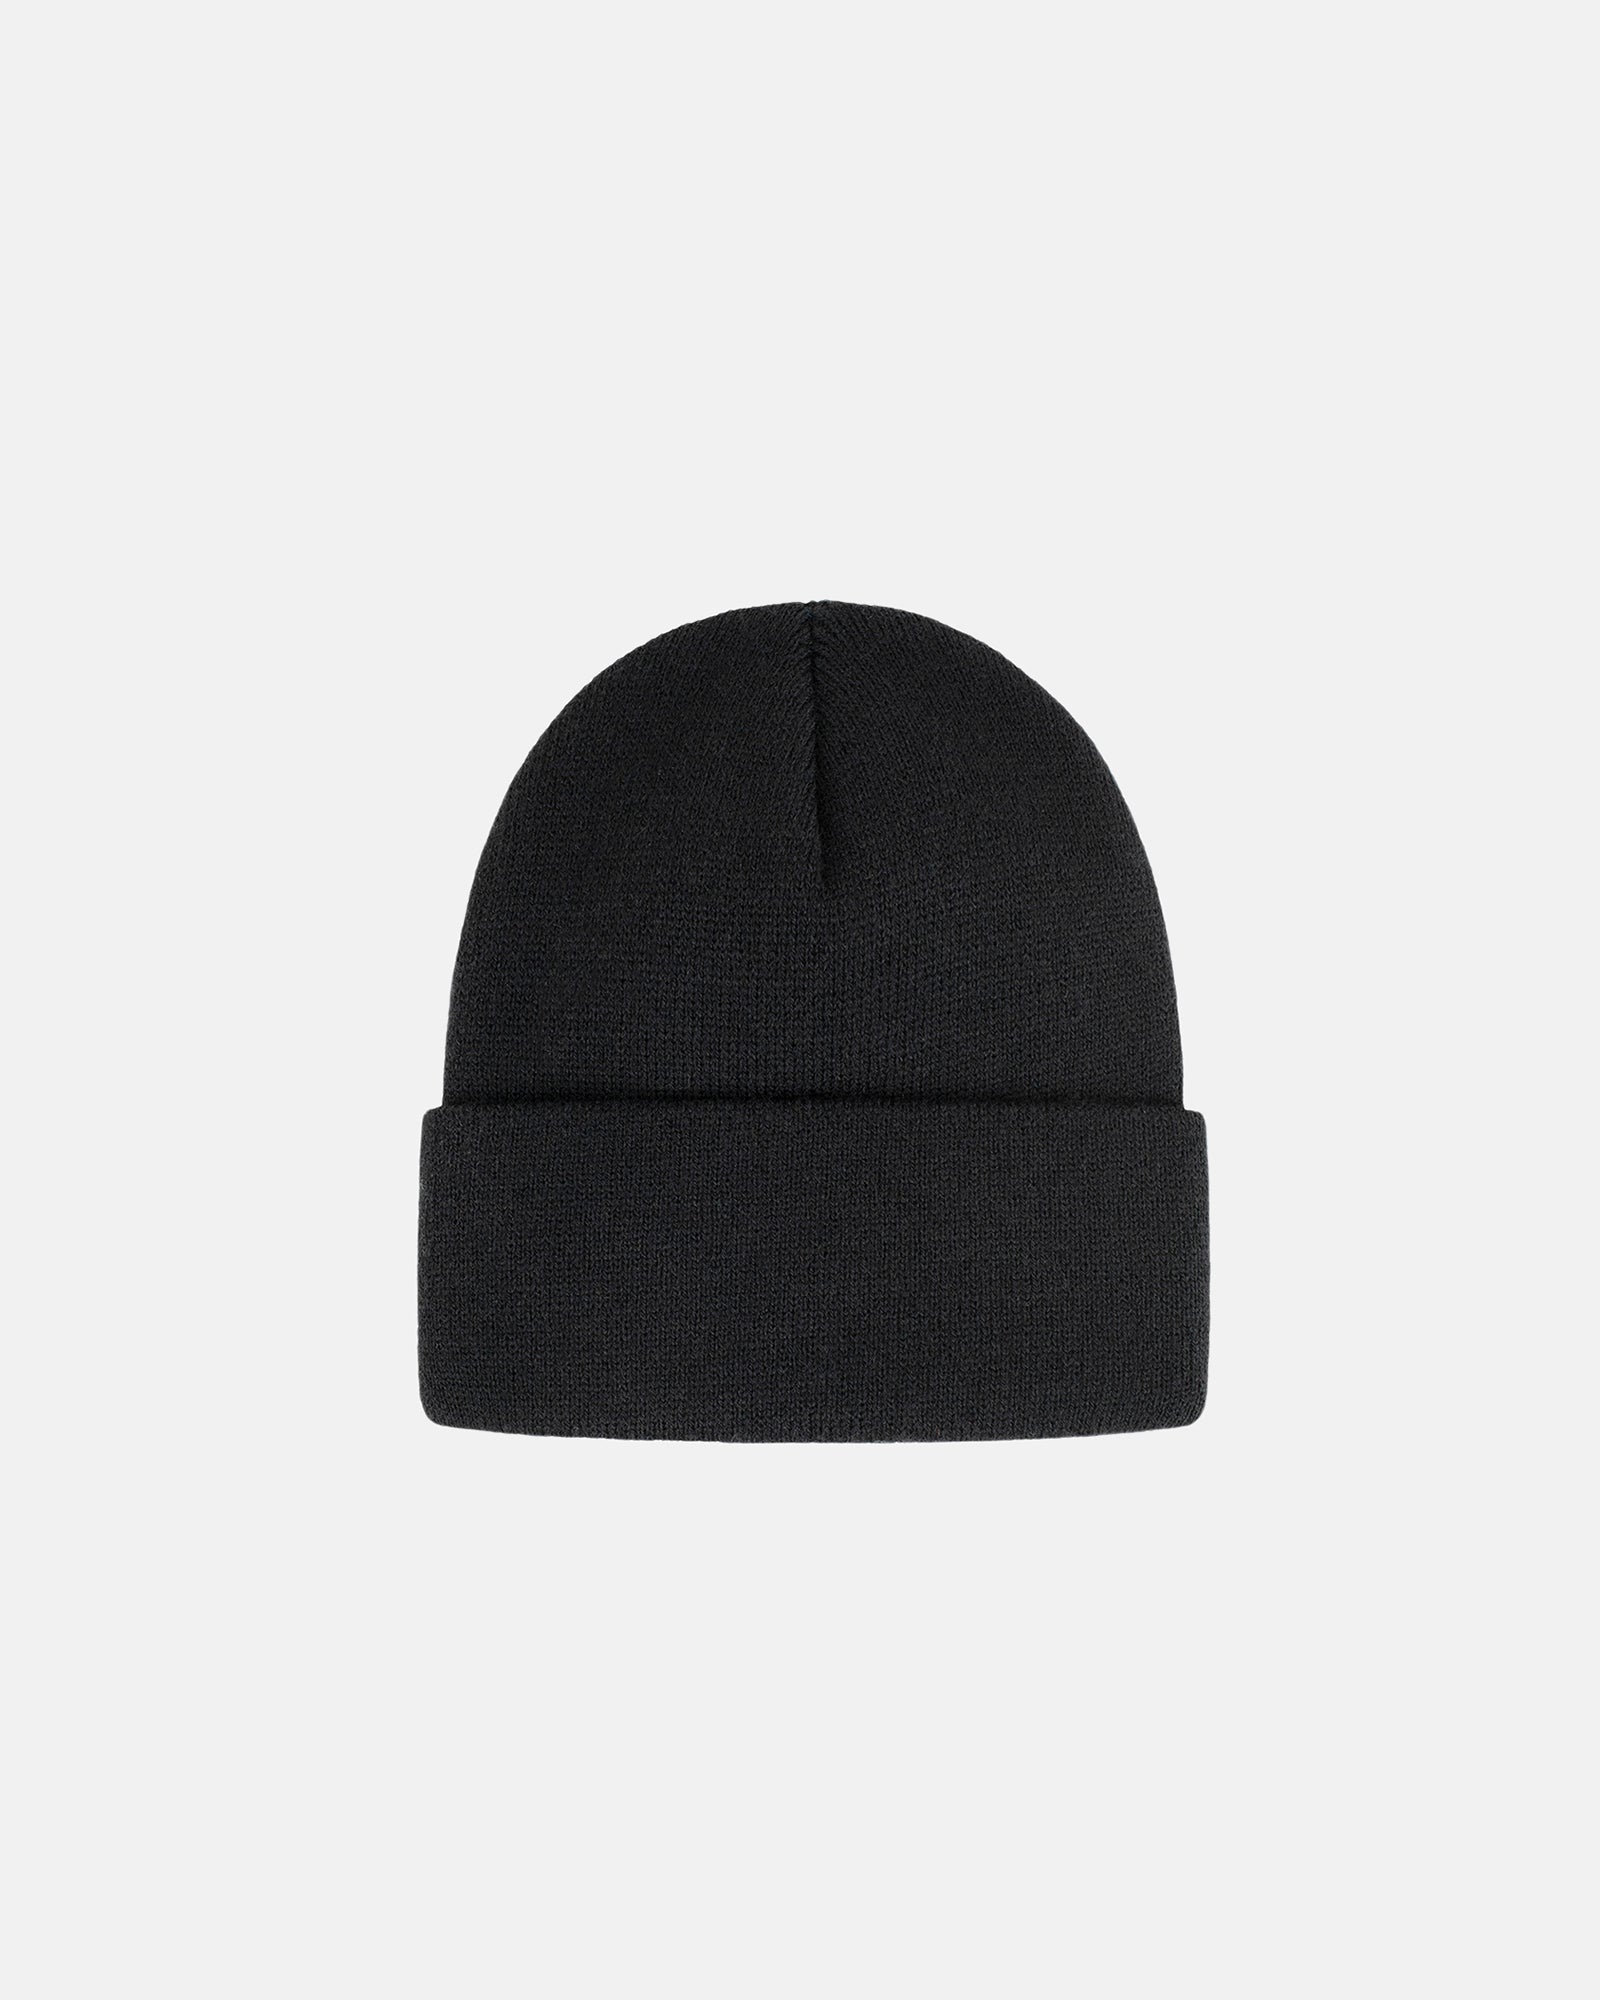 Stussy Hats, Bucket Hats, Caps and Beanies for Men and Women | UK 